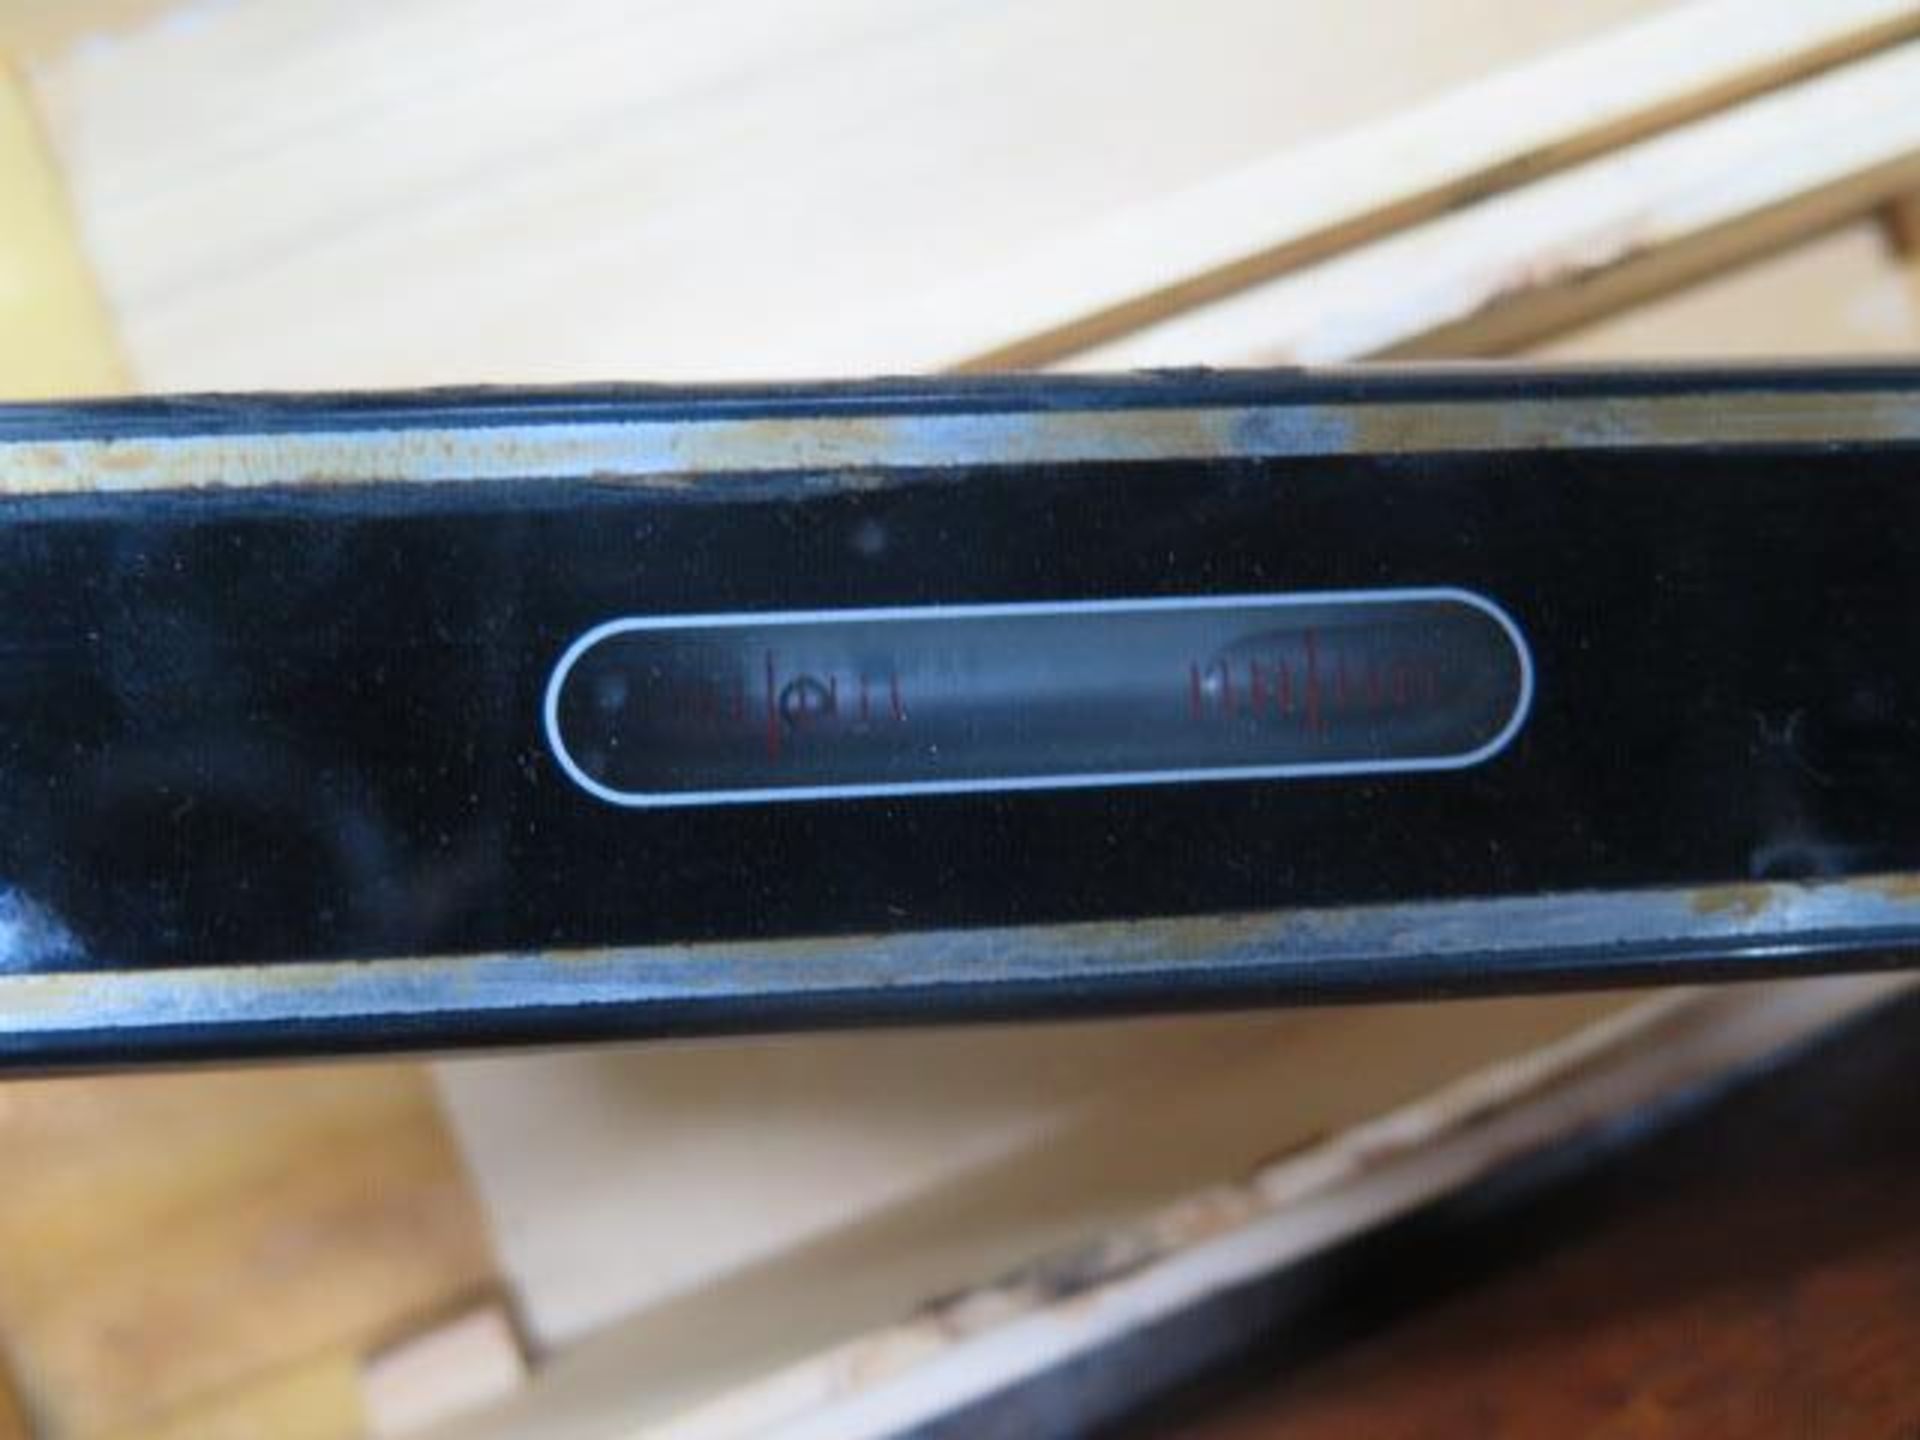 Starrett 15" Master Level and Import 12" Master Level (SOLD AS-IS - NO WARRANTY) - Image 8 of 8